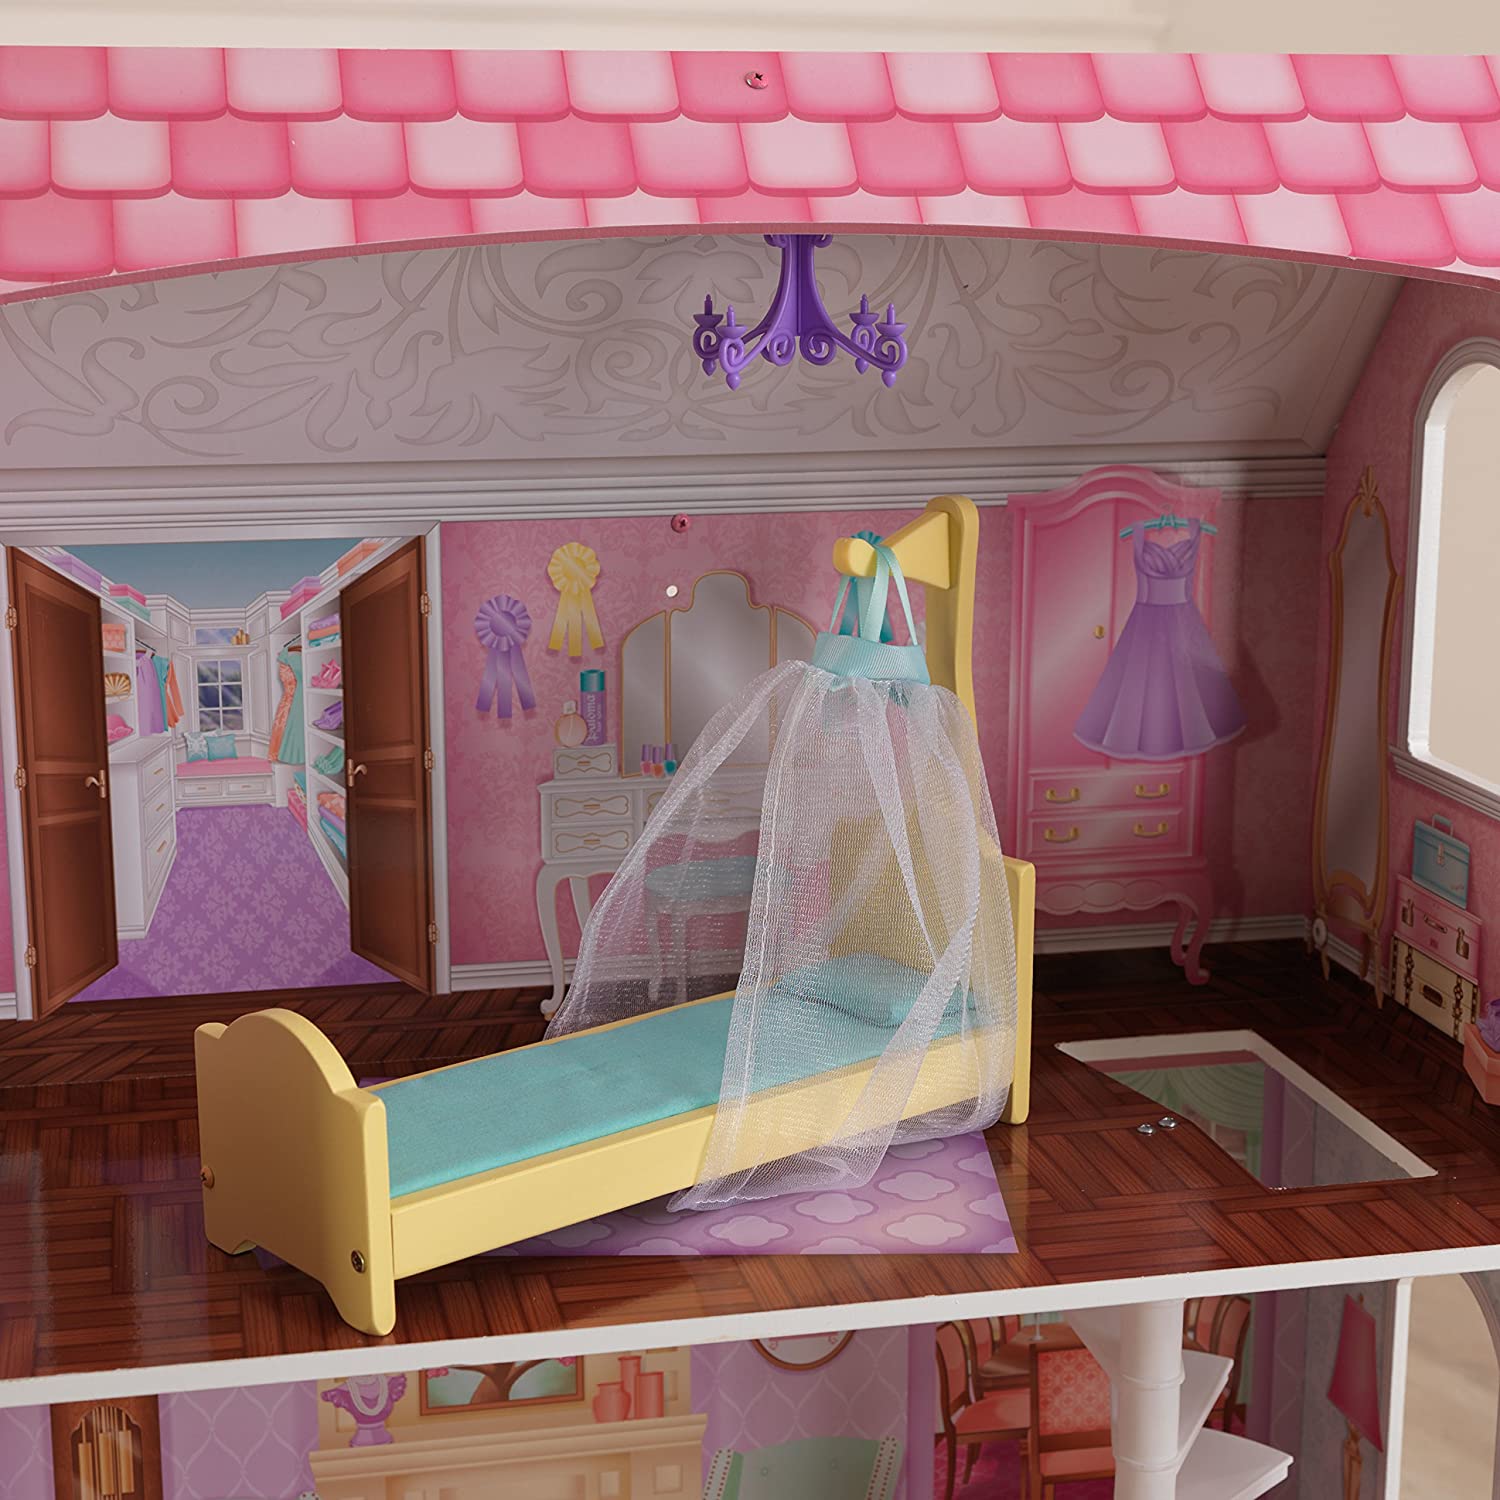 Elegant Pastel Dollhouse with Furniture - A Dreamy World for Kids